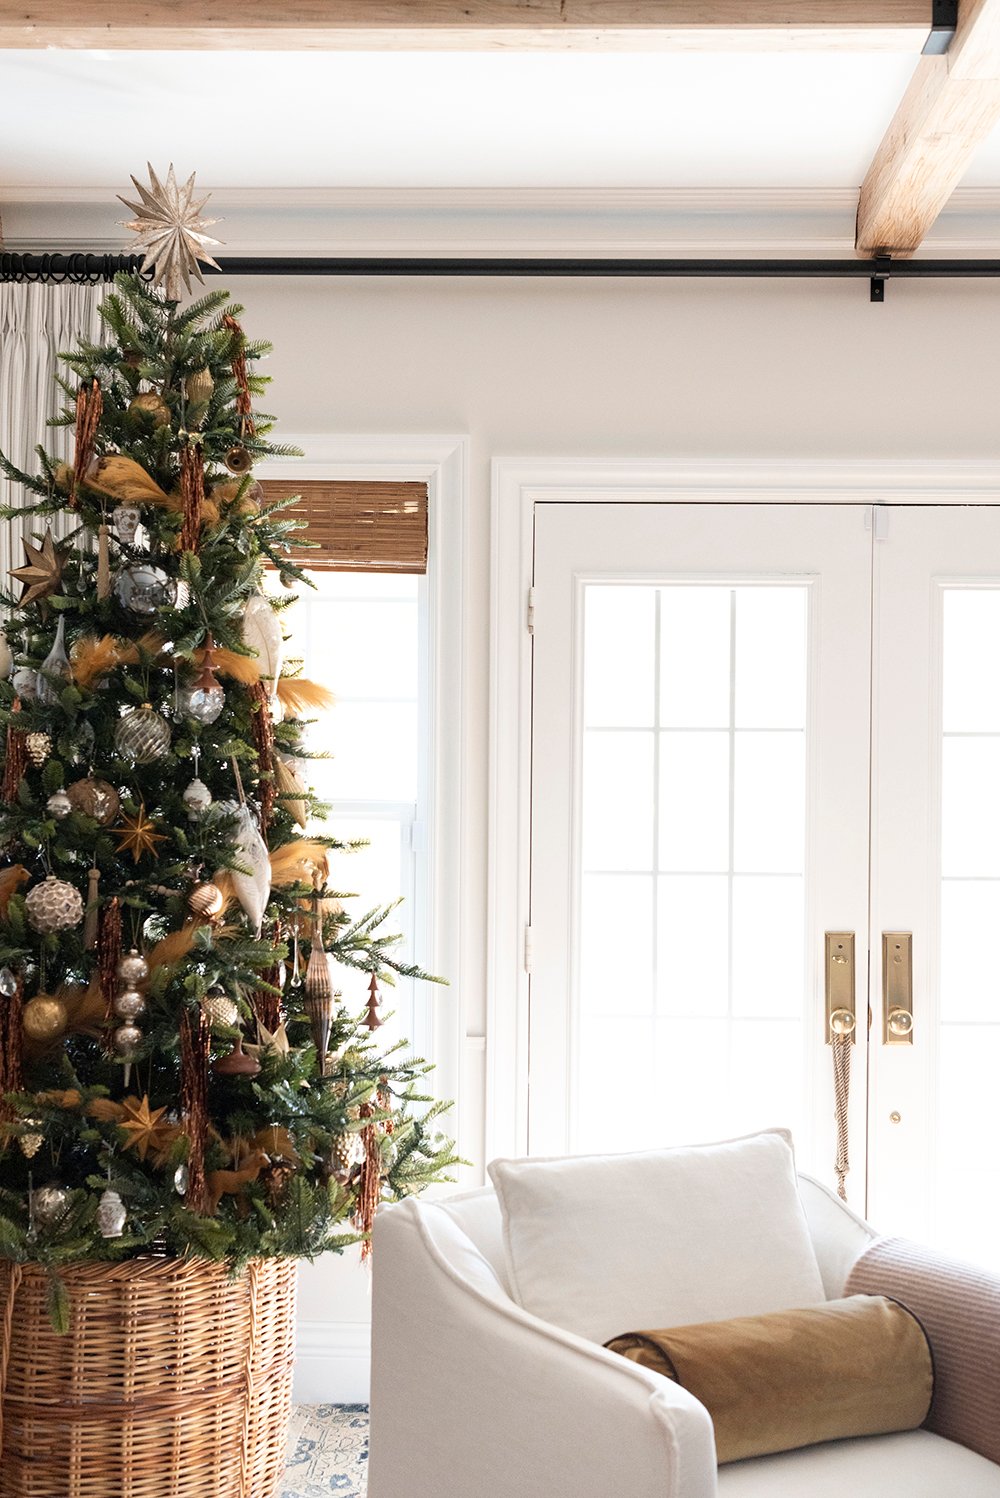 Amazon Christmas Tree Review (Styled 3 Ways) - roomfortuesday.com